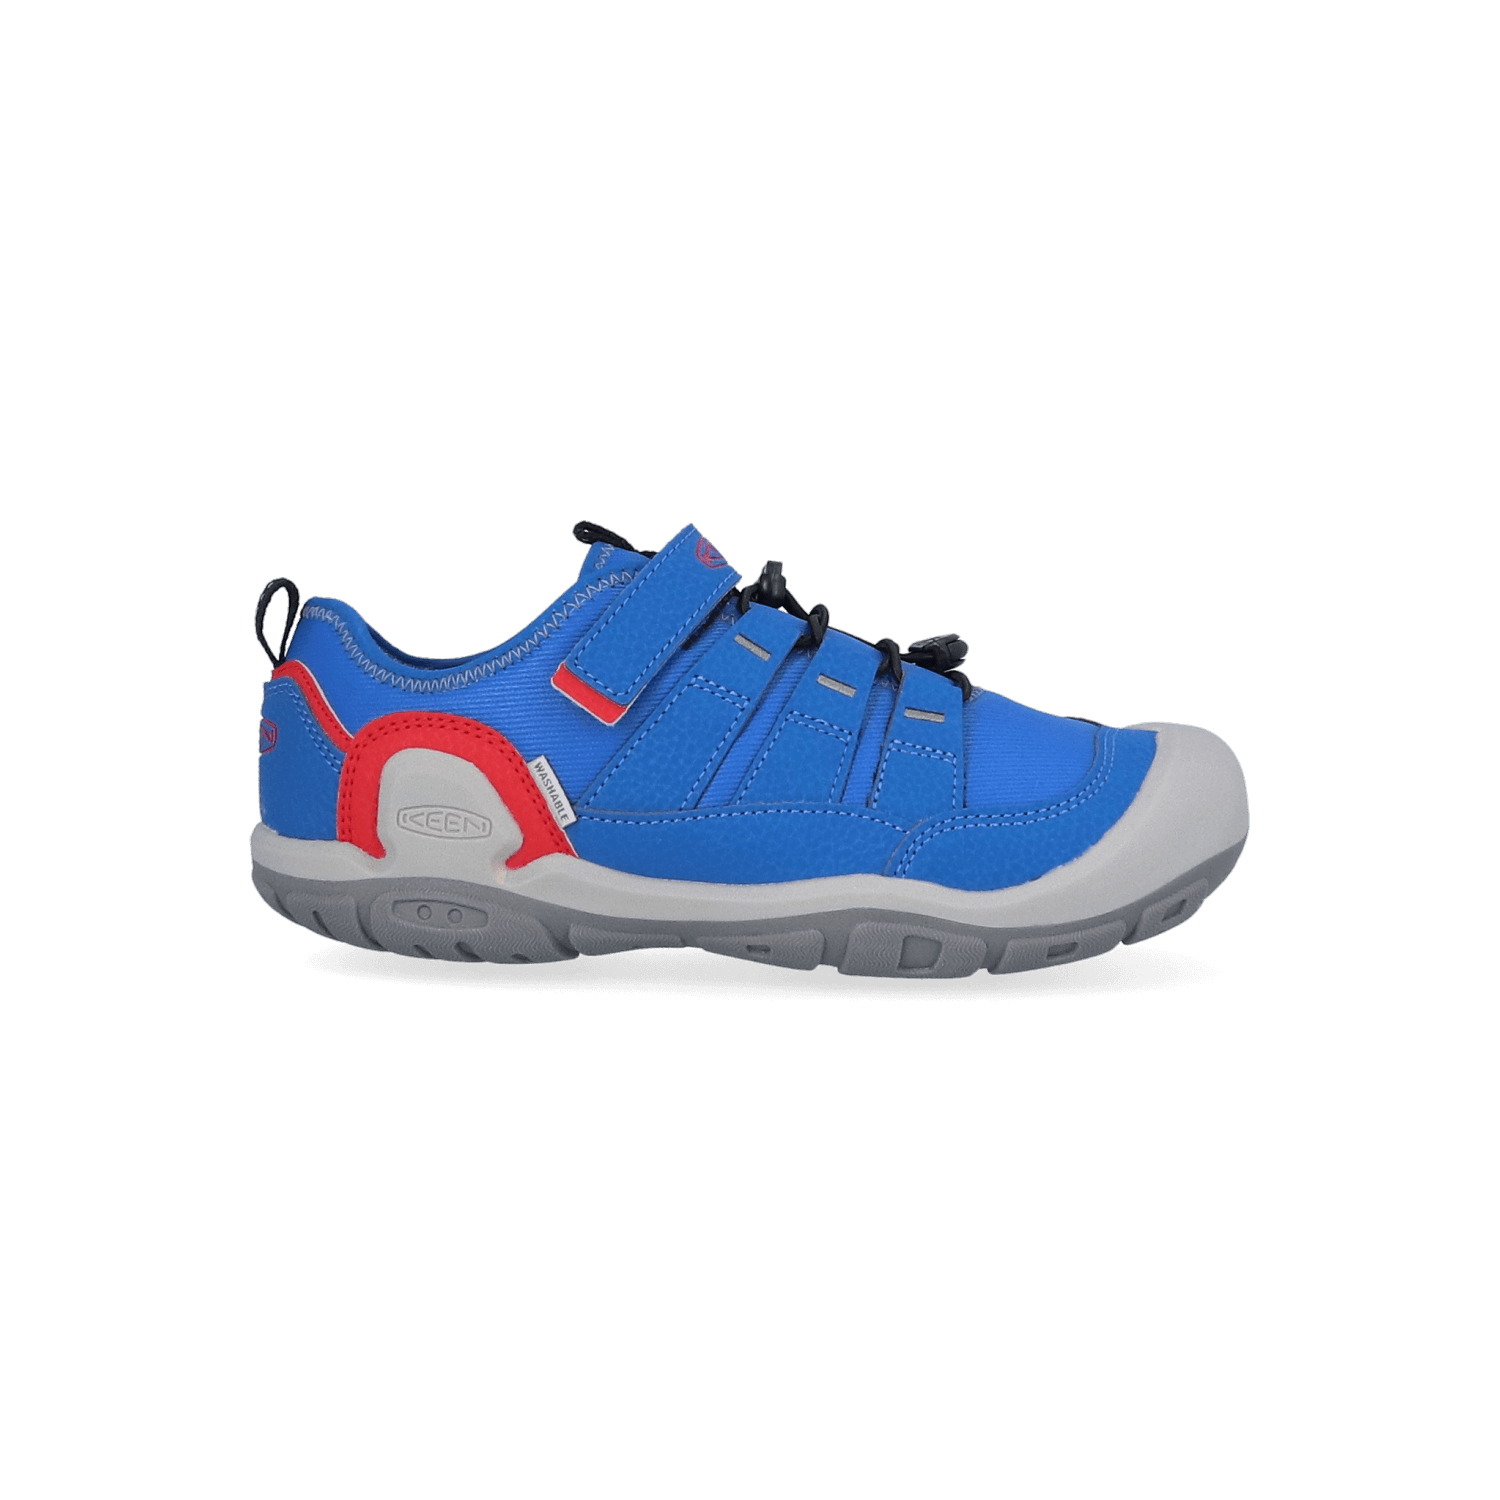 Keen Knotch Hollow Older Kids' Sneakers Classic Blue/Red